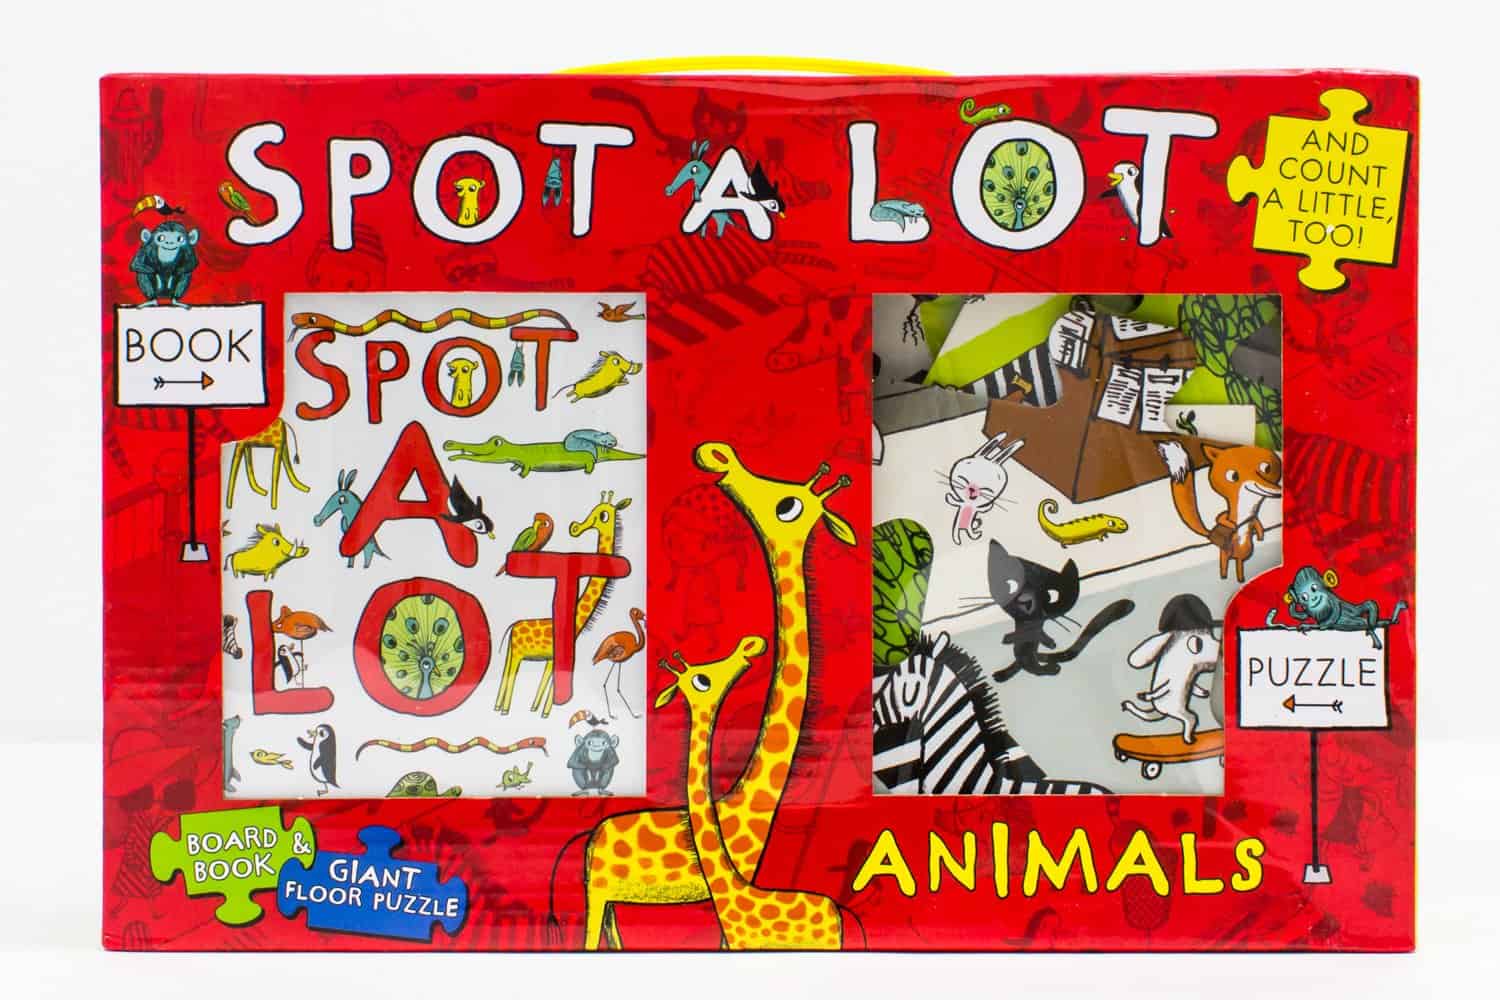 Spot a Lot Animals Storybook and 2 in 1 Jigsaw Puzzle